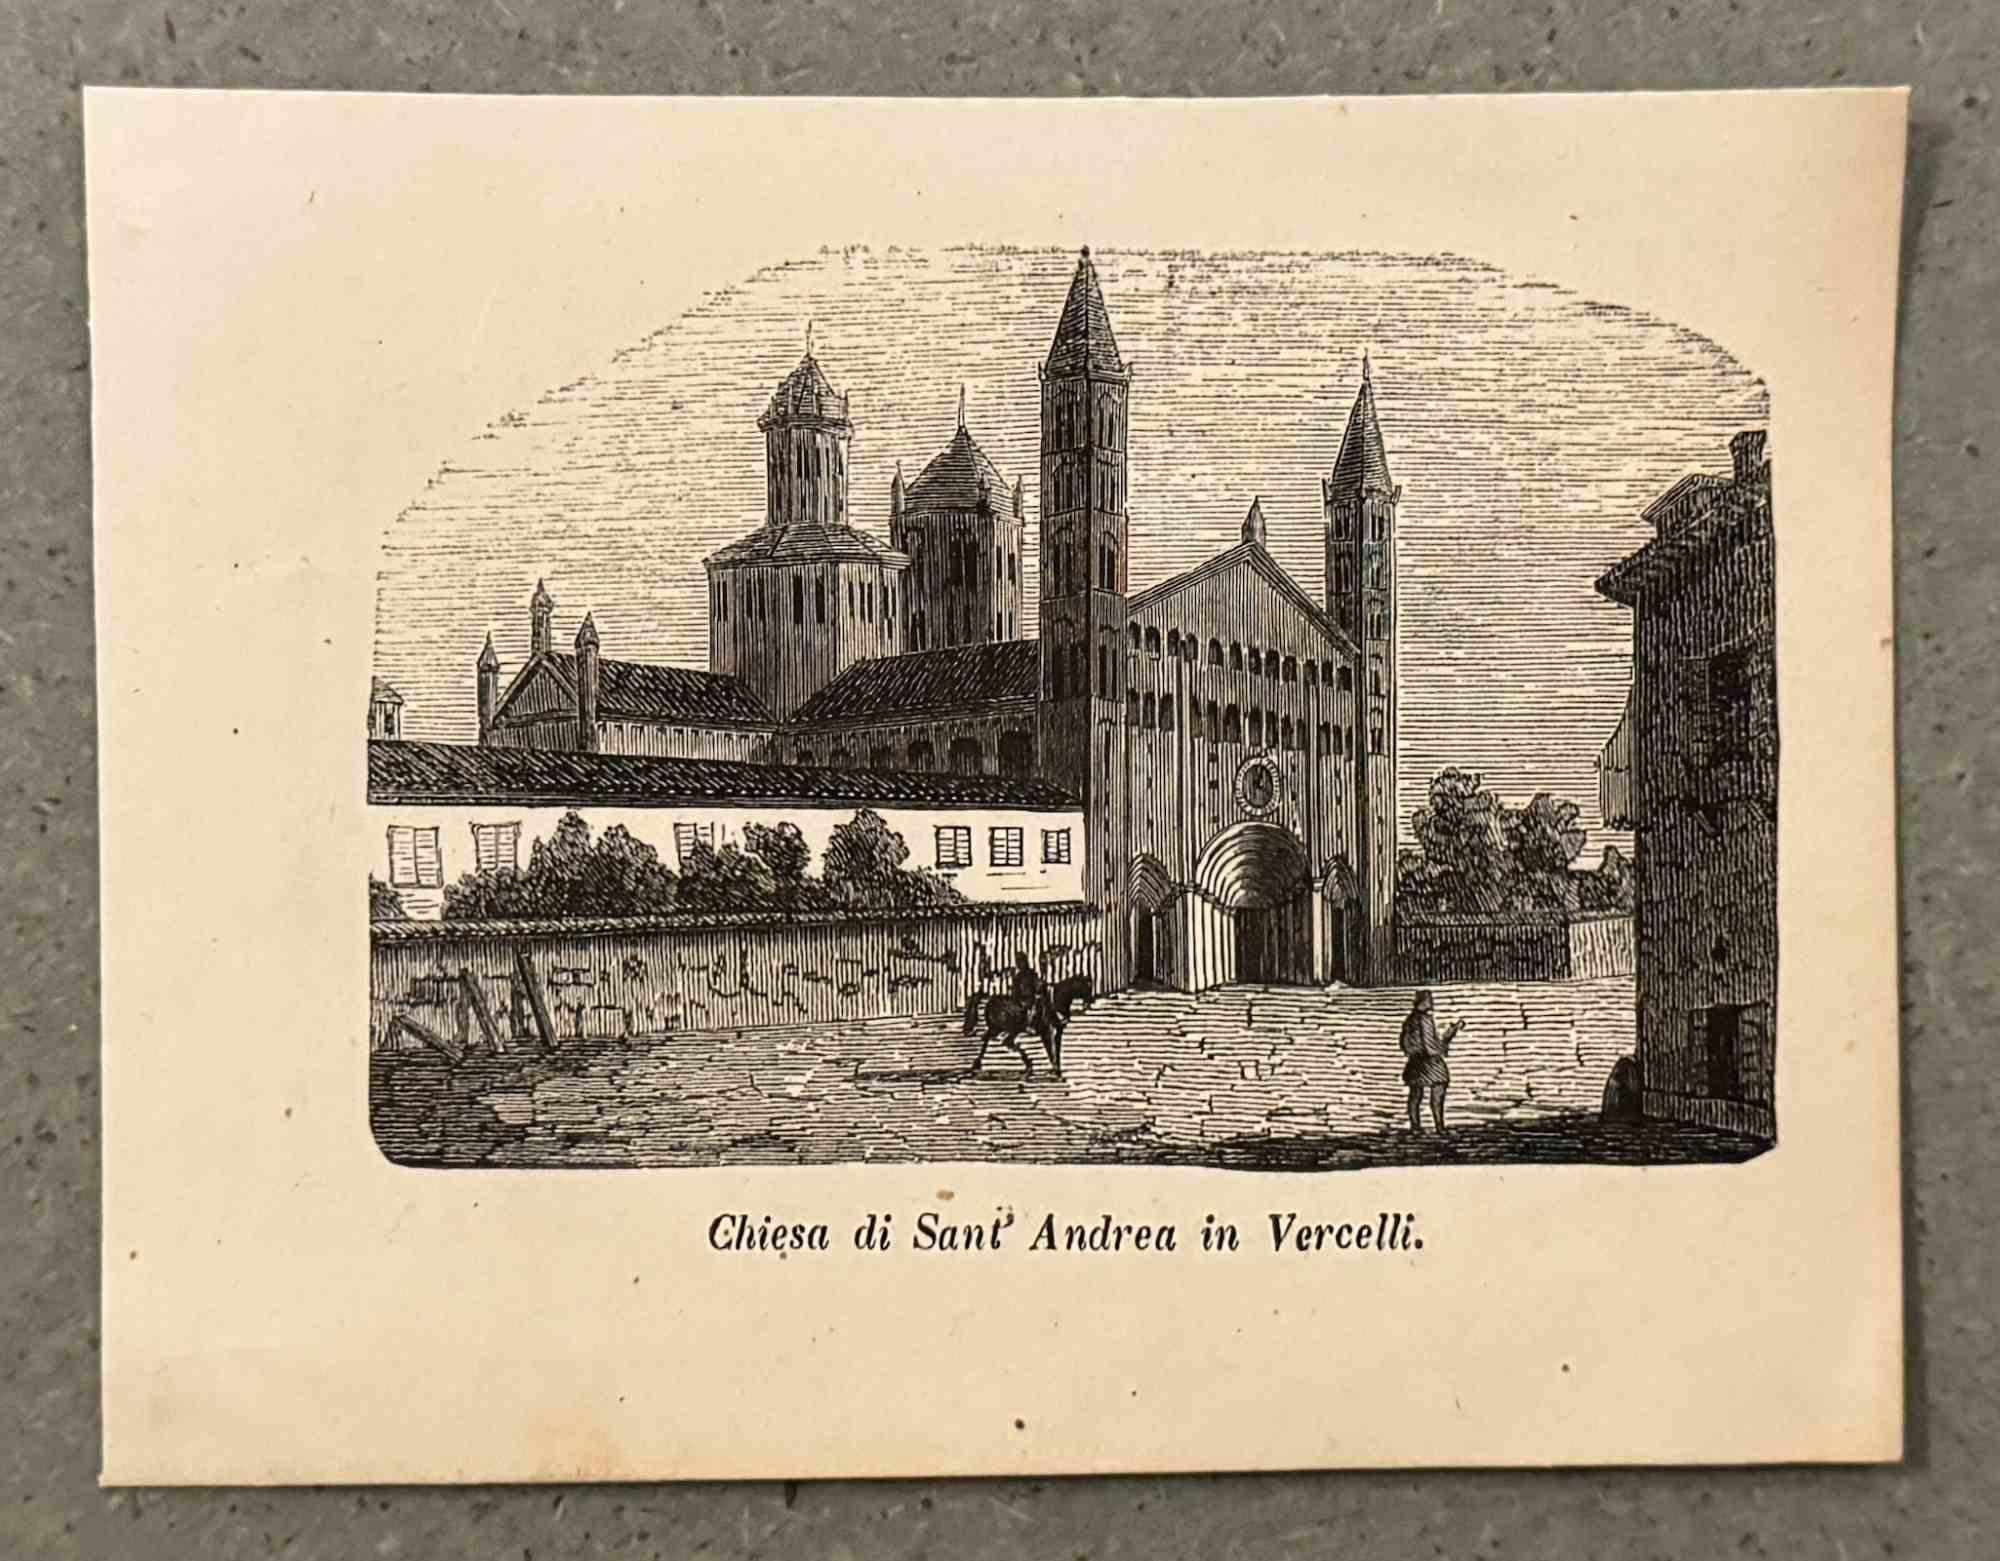 Various Artists Figurative Print - Church of Sant Andrea in Vercelli - Lithograph - 19th Century 